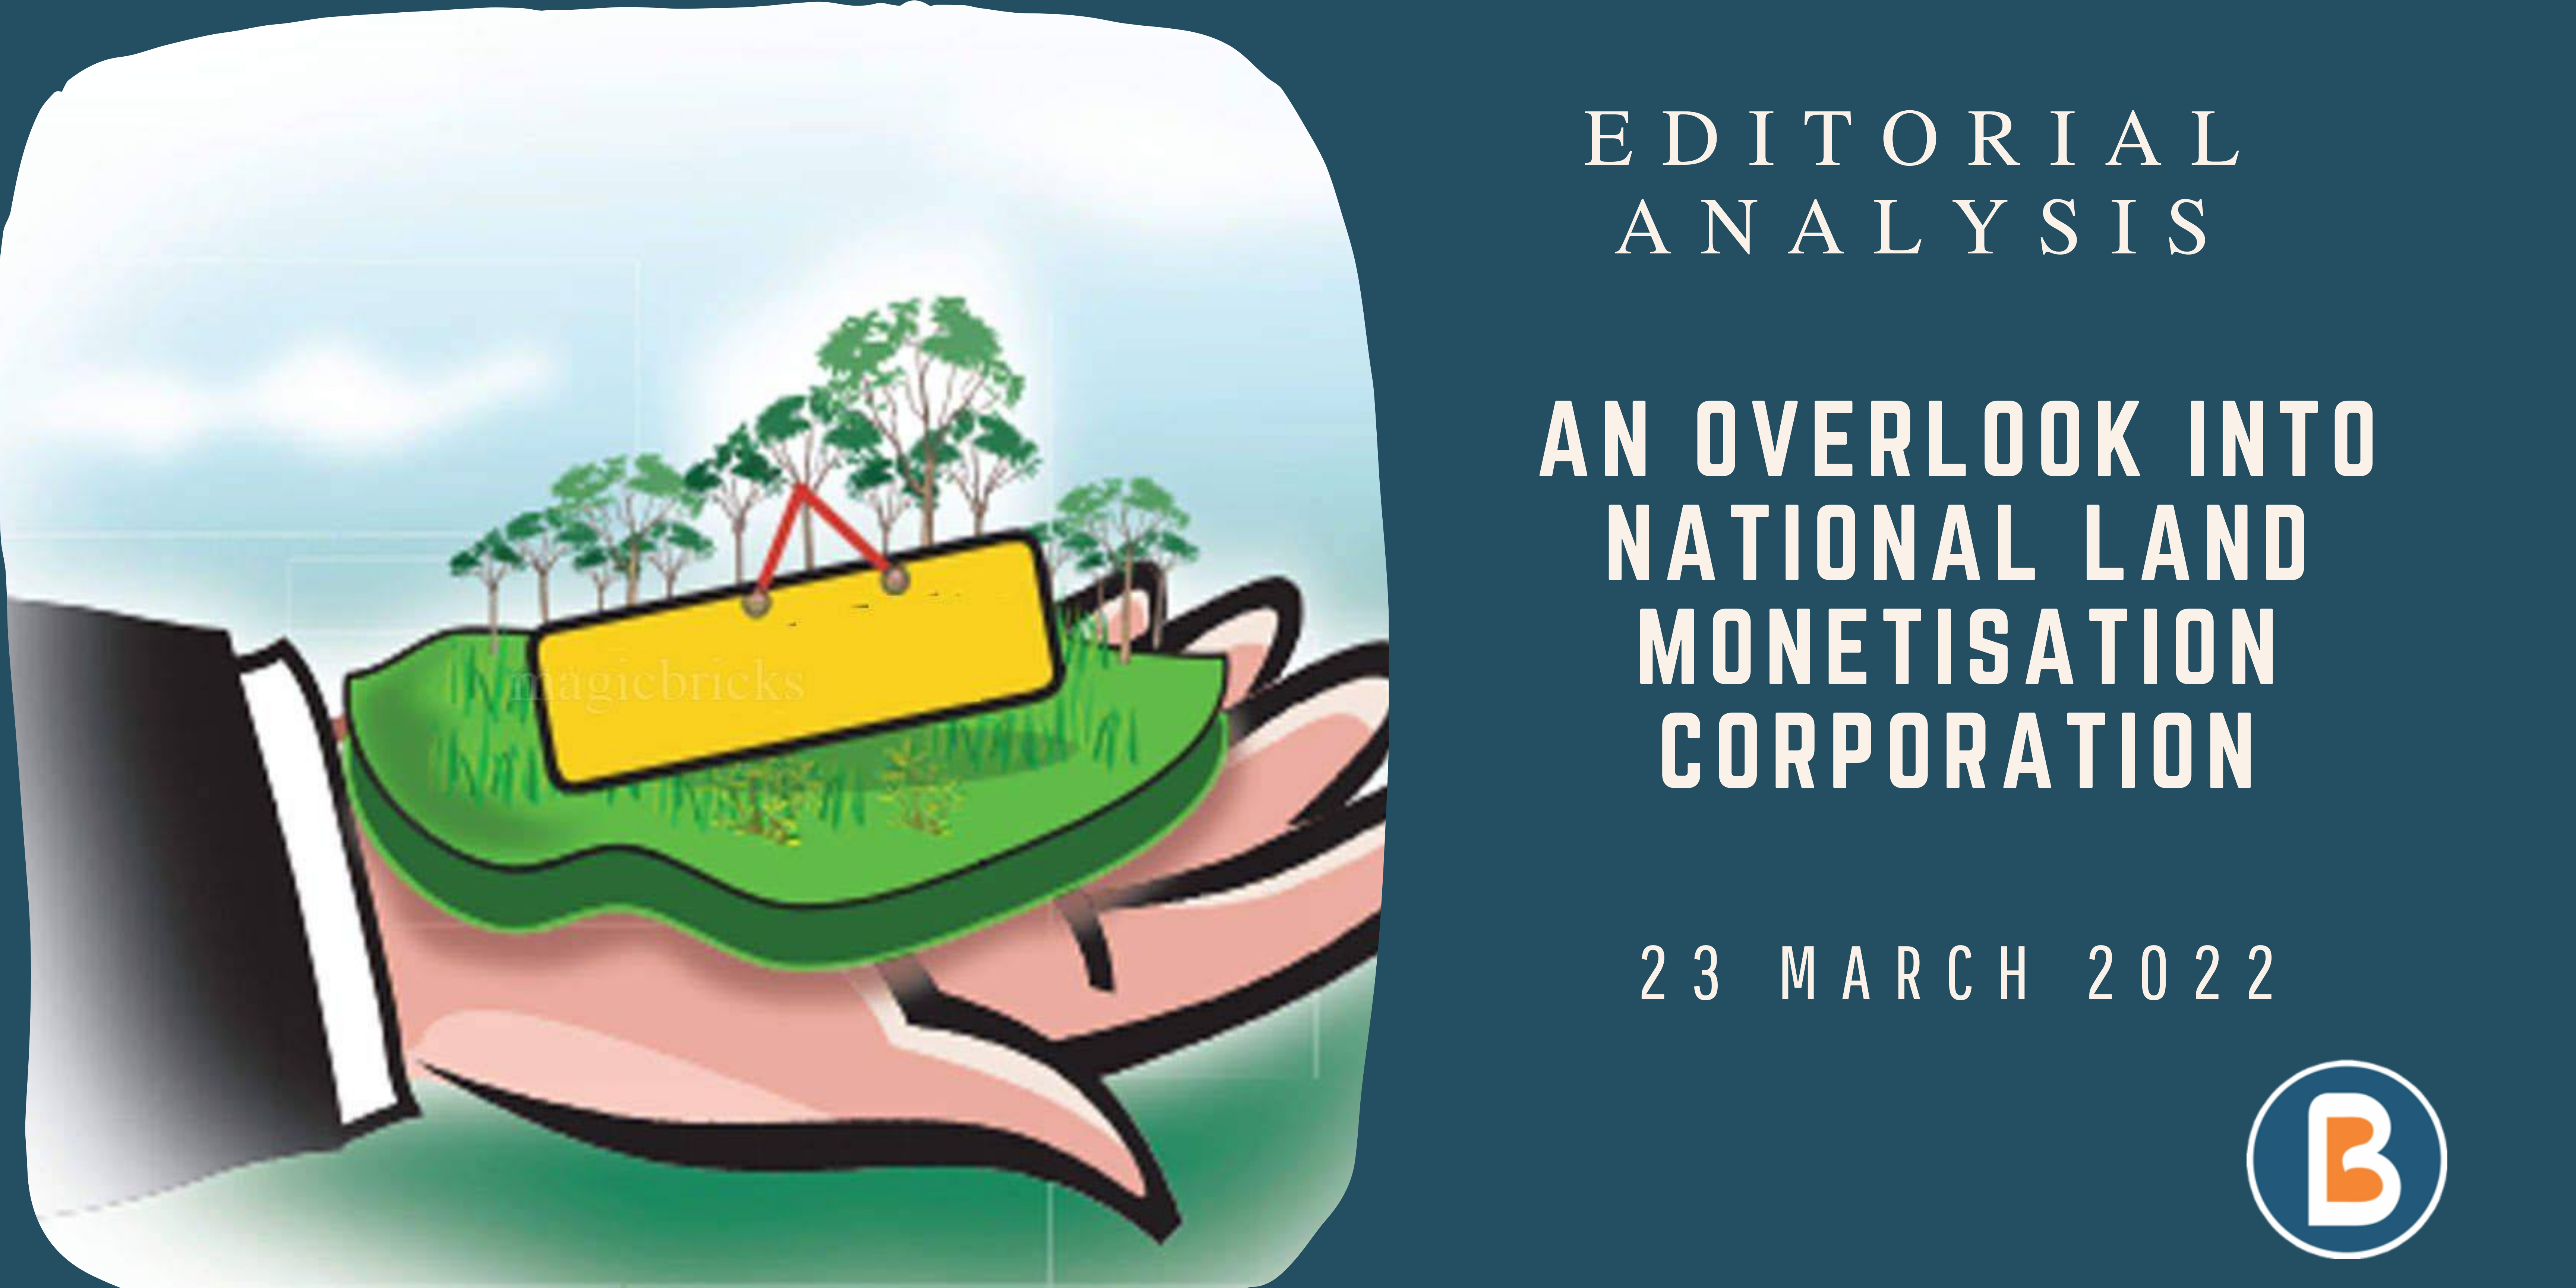 Editorial Analysis for UPSC - An overlook into National Land Monetisation Corporation